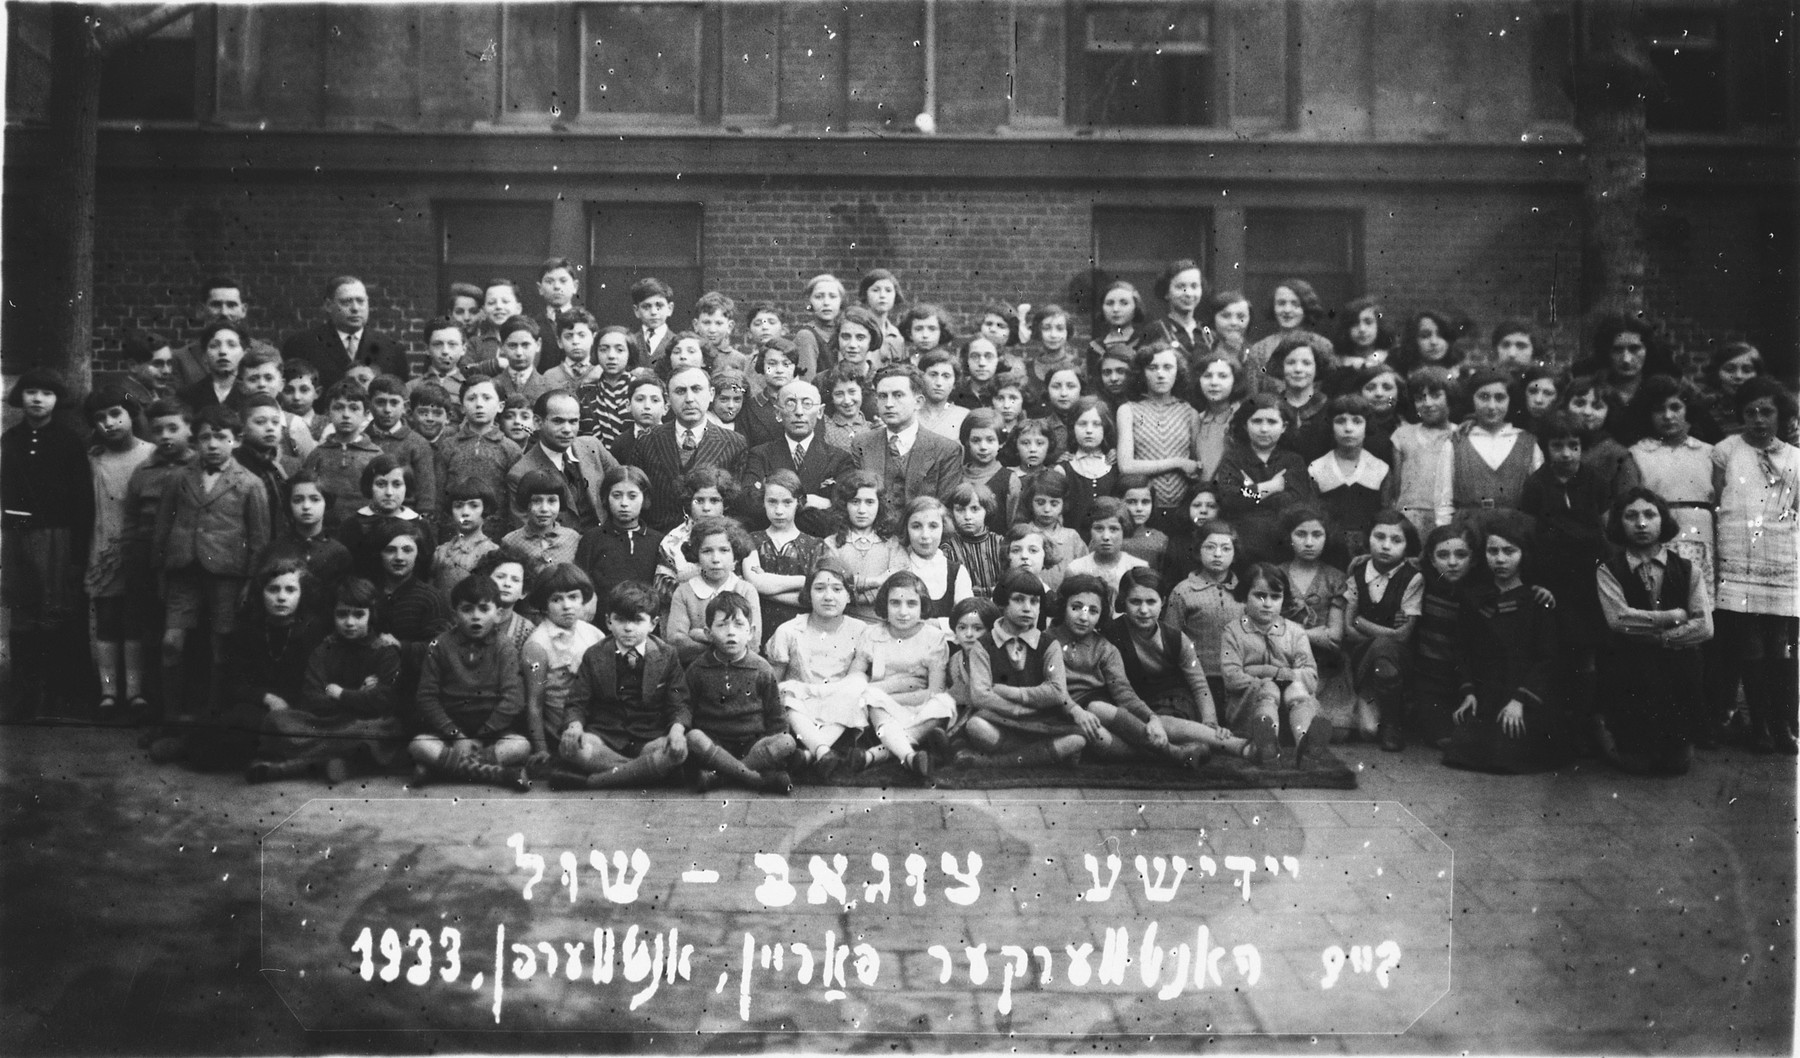 Group portrait of the children and faculty of the Yiddish Tsugob shul, sponsored by the Jewish Artisan Association.

Among those pictured is Paula Lasman (second row, far left), Mr. Schwartz (in the group of men in the center, far left), Mr. Lubka (back row, far left).  Both men were on the board of the Tsugobshul.